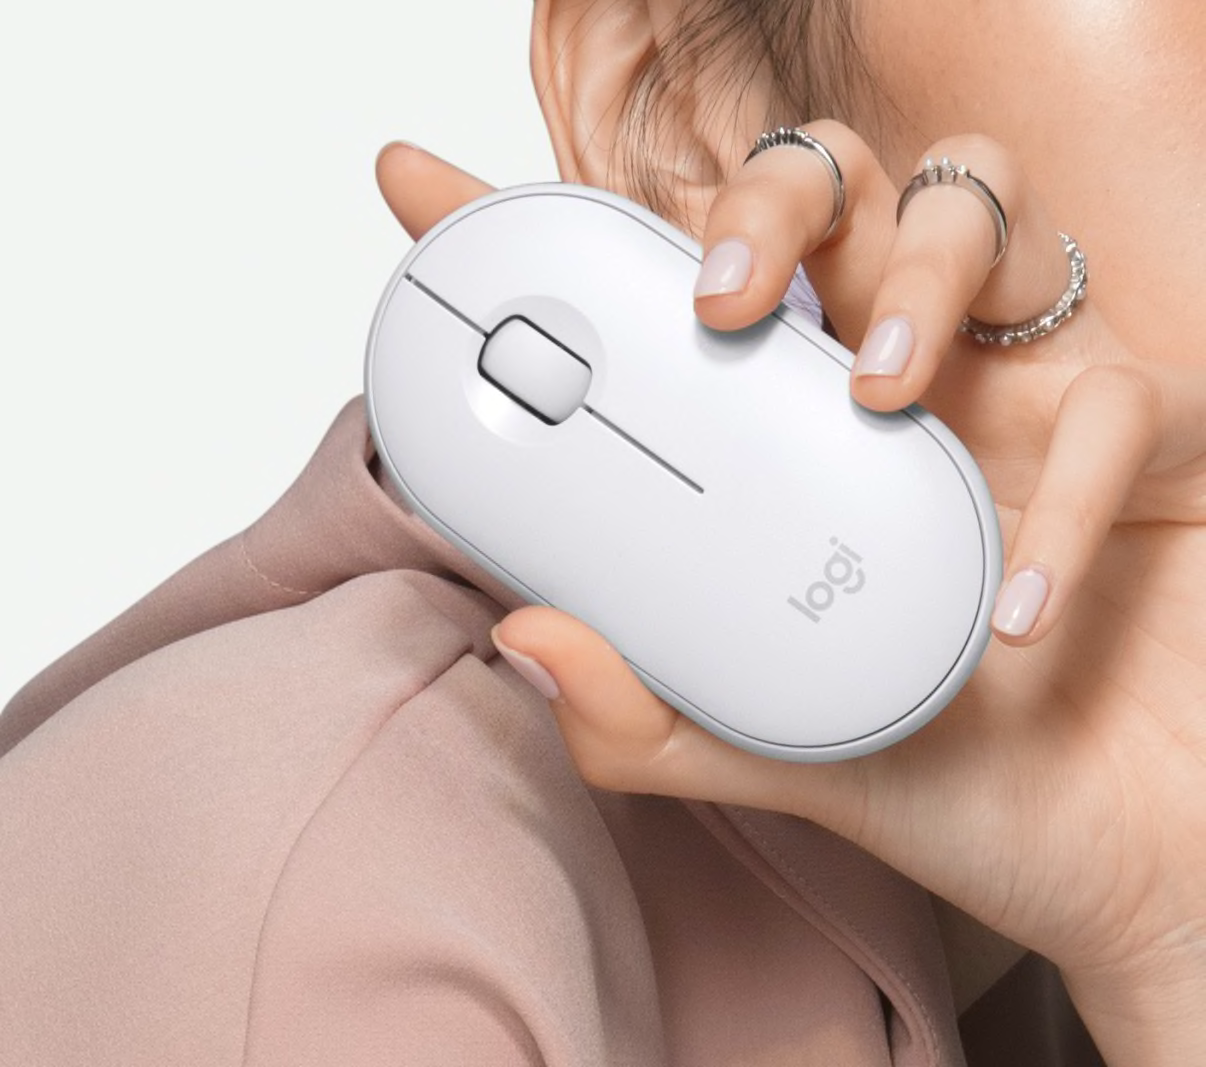 A person holding a white computer mouse